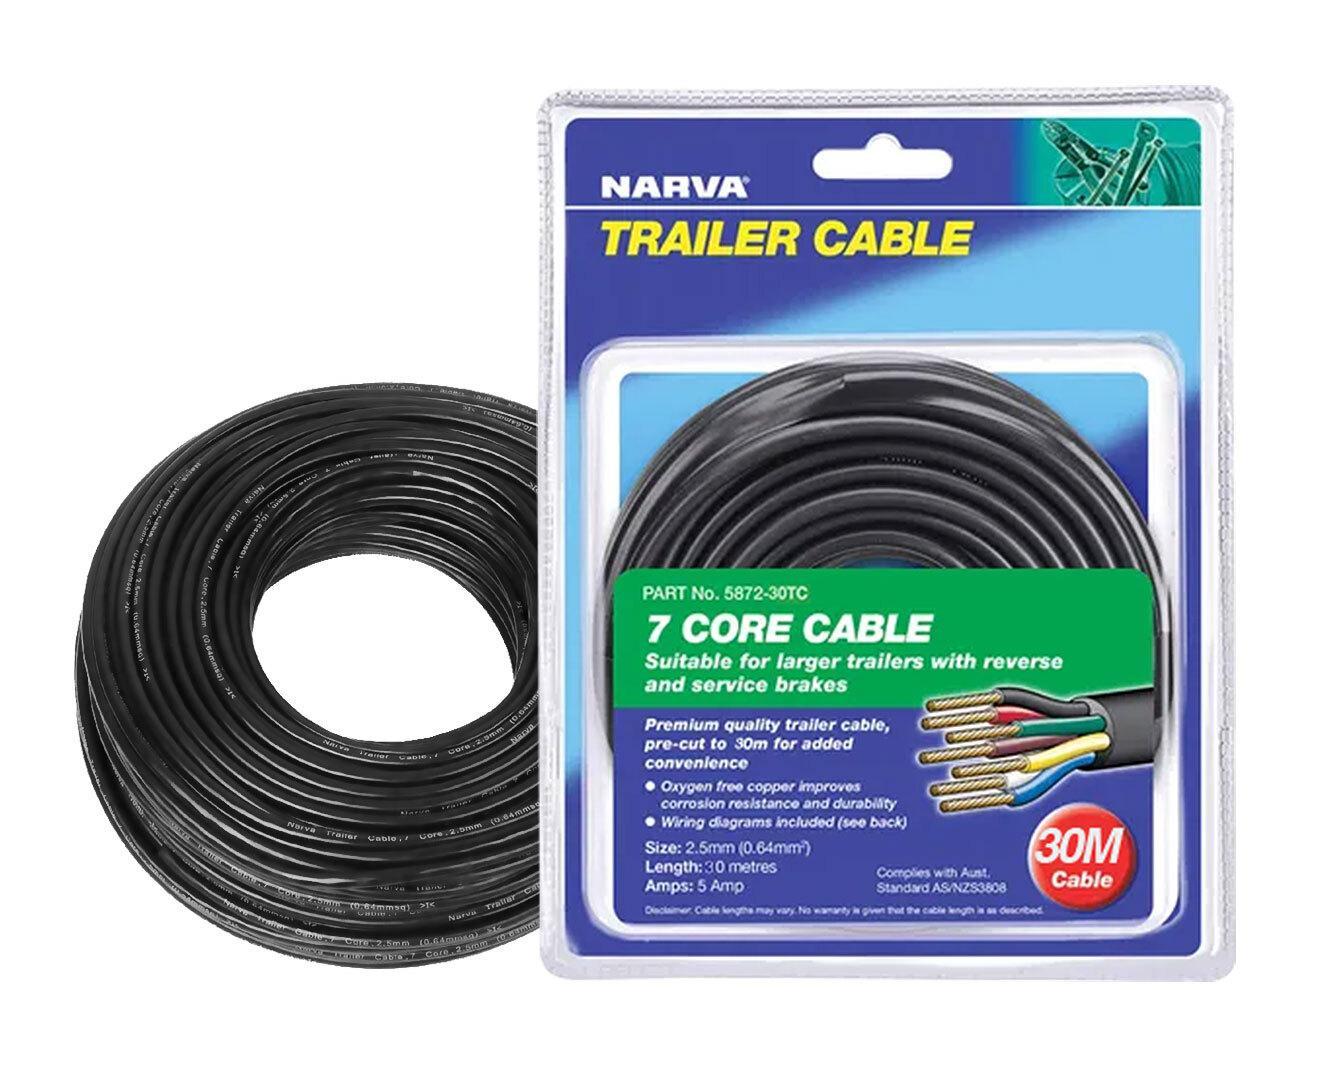 Narva 7 Core Trailer Cable 2.5mm 5A 30m Automotive Boat Caravan Truck Wire Cable V90 PVC Insulated